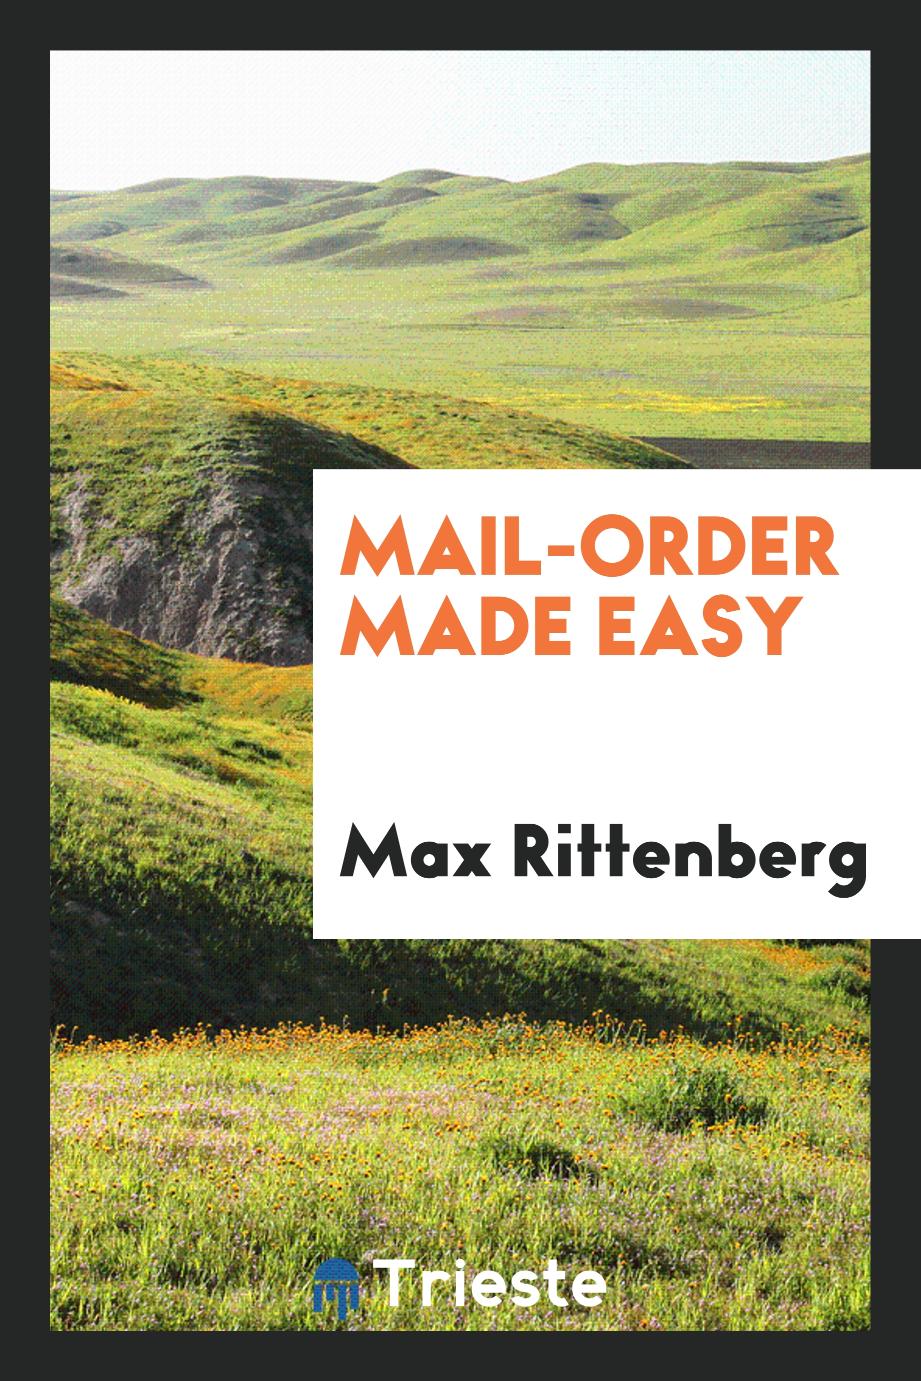 Mail-order made easy